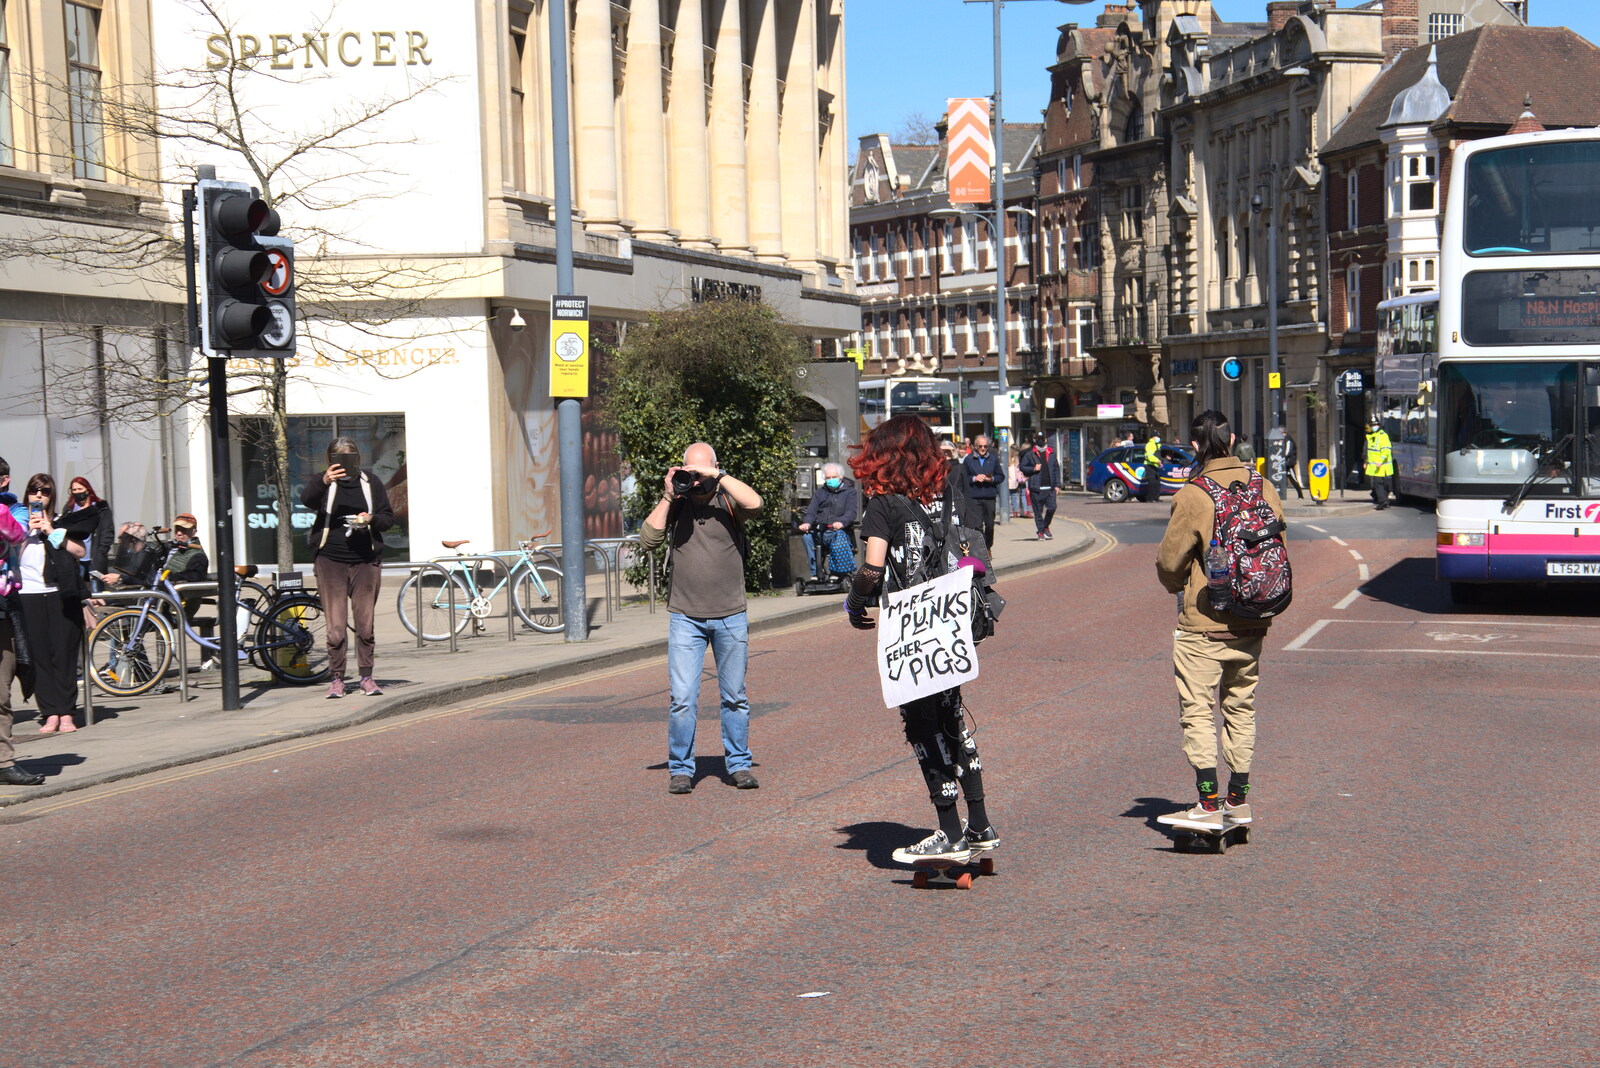 More punks, fewer pigs, on a skateboard from The Death of Debenhams, Rampant Horse Street, Norwich, Norfolk - 17th April 2021